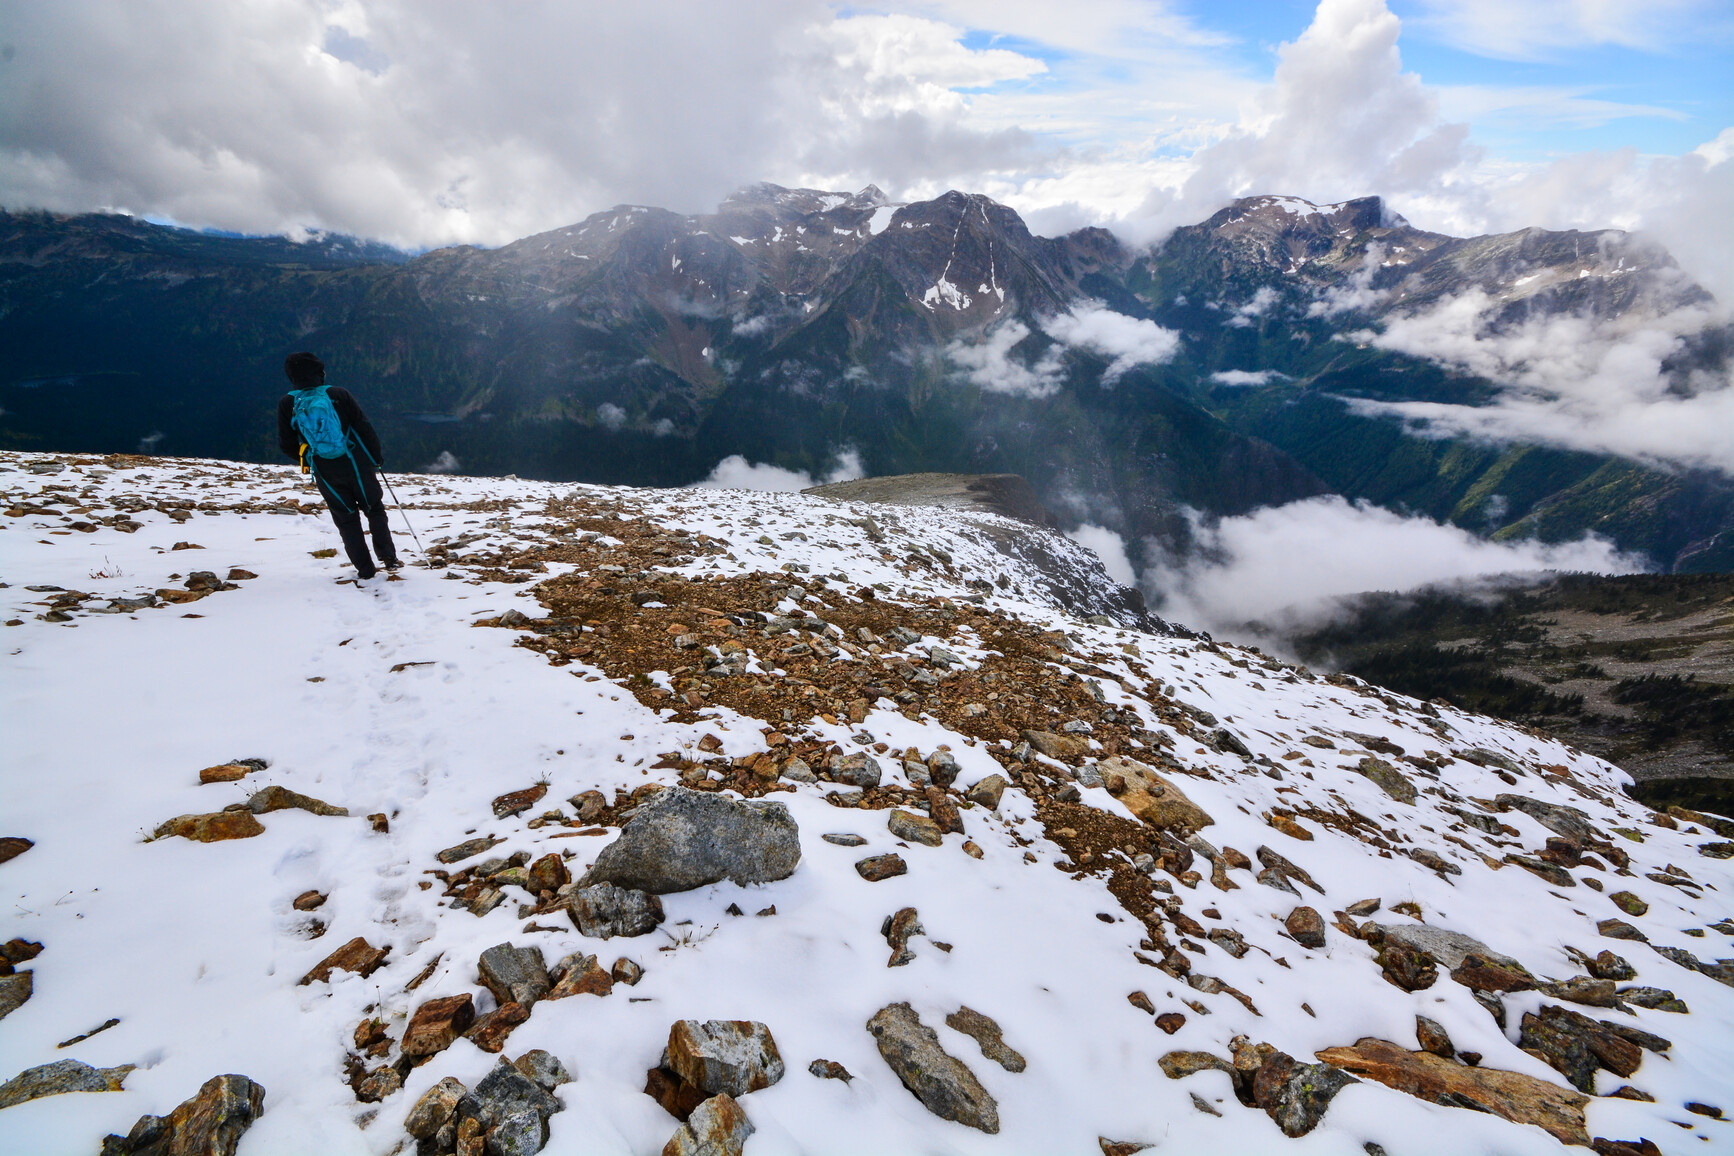 A park visitor is enjoying the view from a ridge on Mount Frosthall. The ridge is snowy and consists of rocky terrain. Across the valley is big mountains with summits in the clouds.